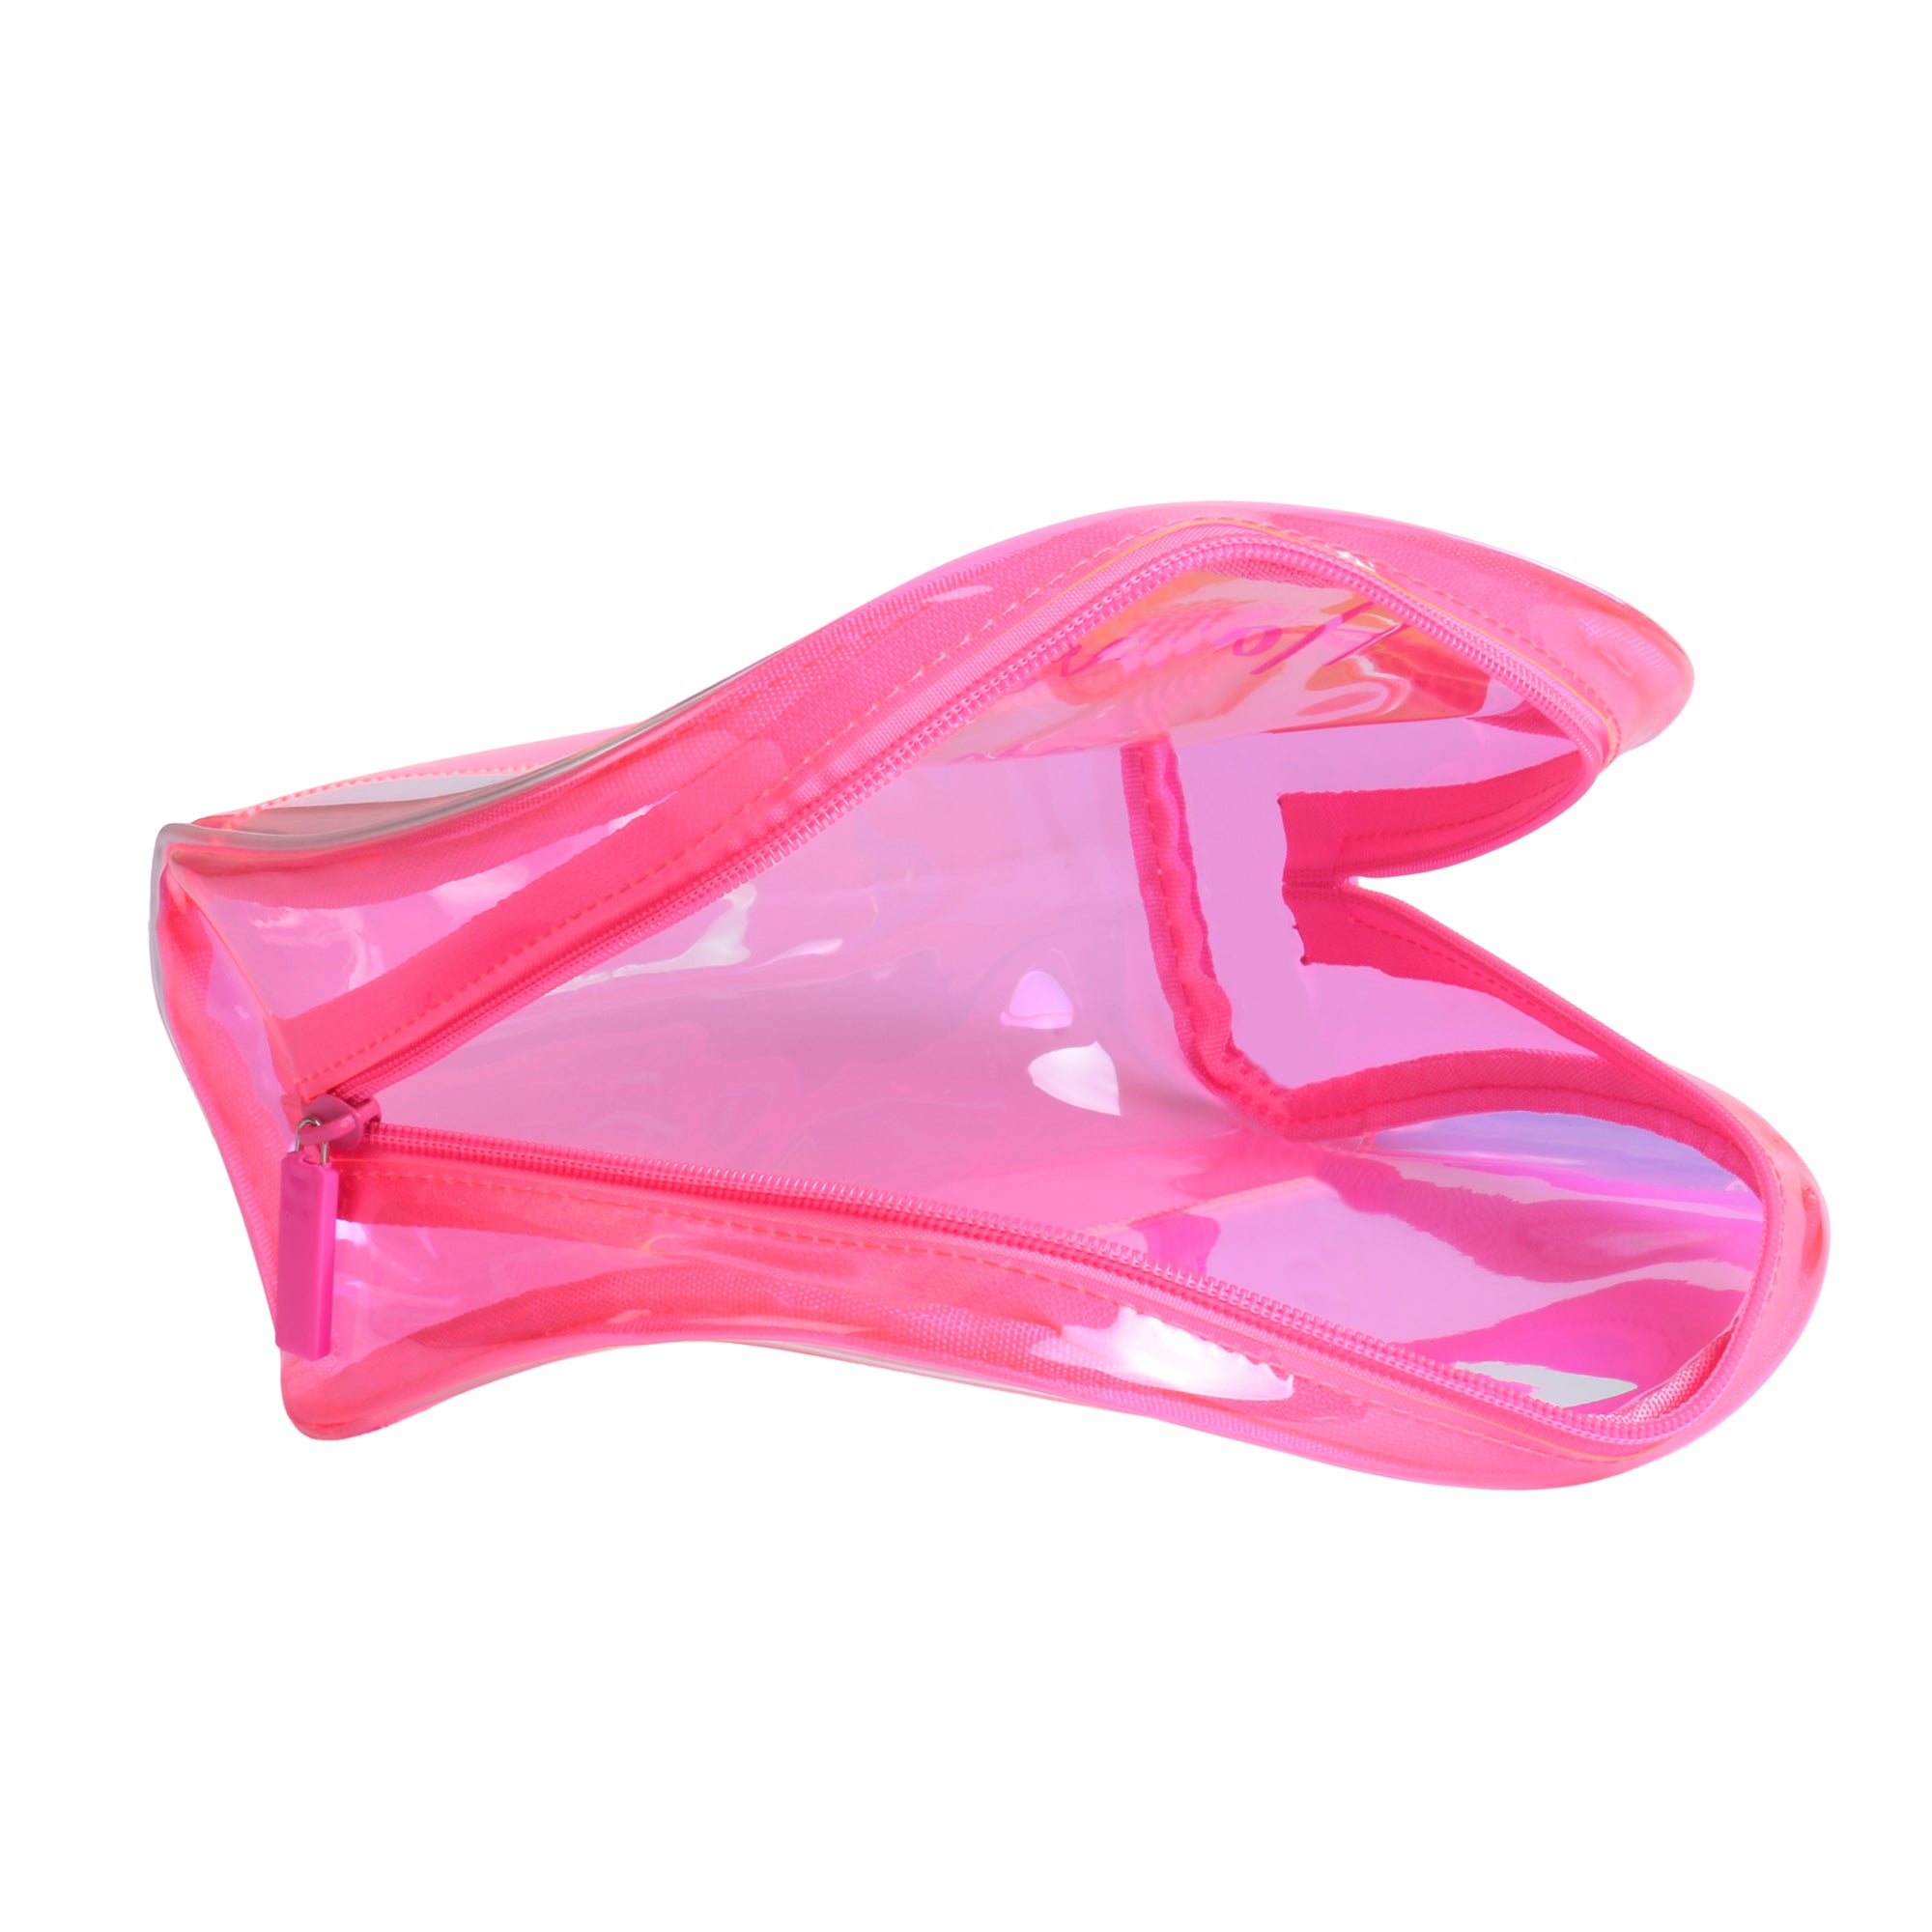 Hamster IN-U Pouch Pink